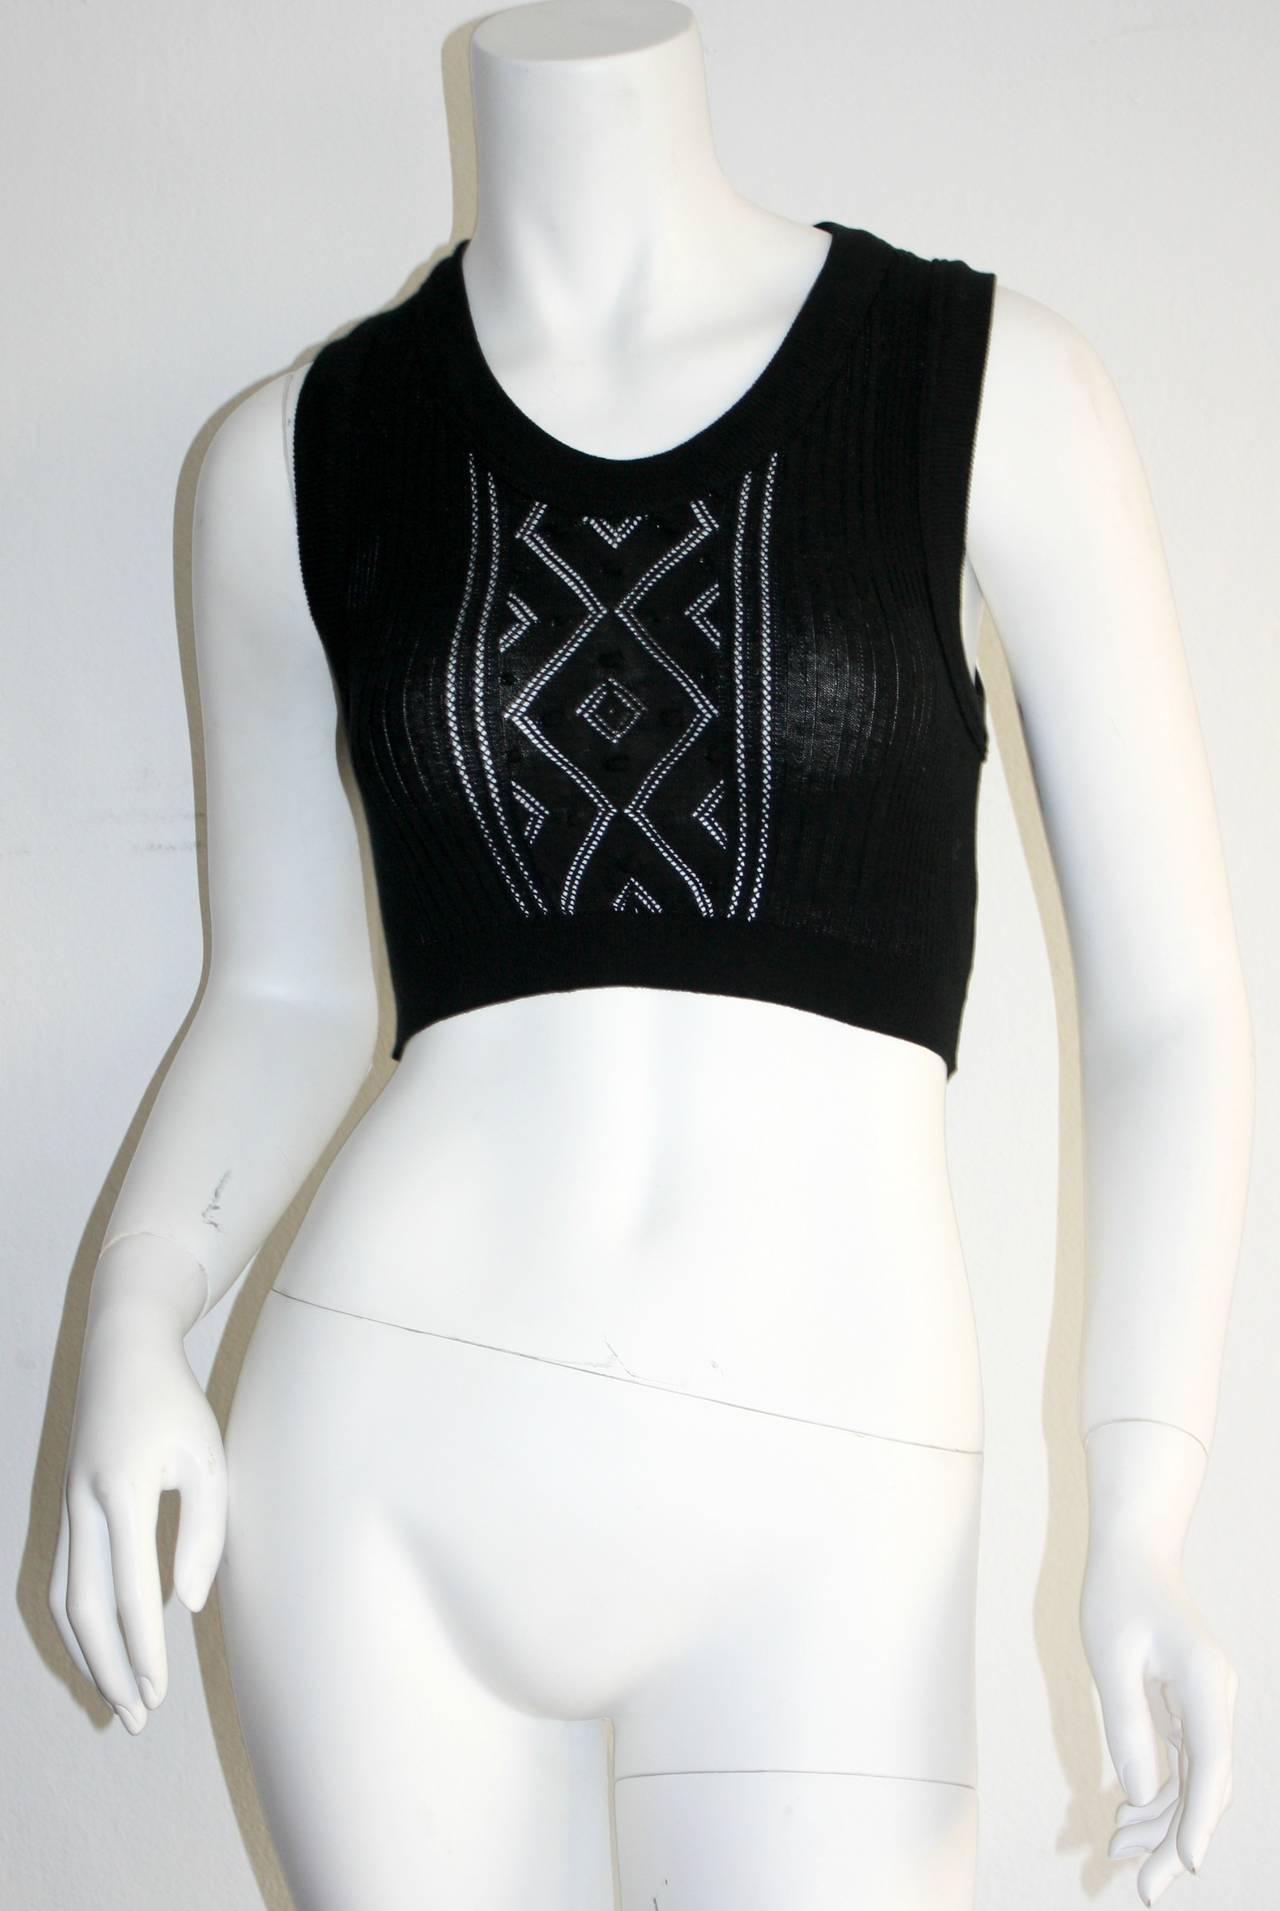 Sexy vintage Jean Paul Gaultier black geometric cut-out crochet crop top. A great piece, with intricate stitching detail. Signature loop at back neck. In great condition--Appears to never have been worn.

Measurements: (Features stretch)
30-38